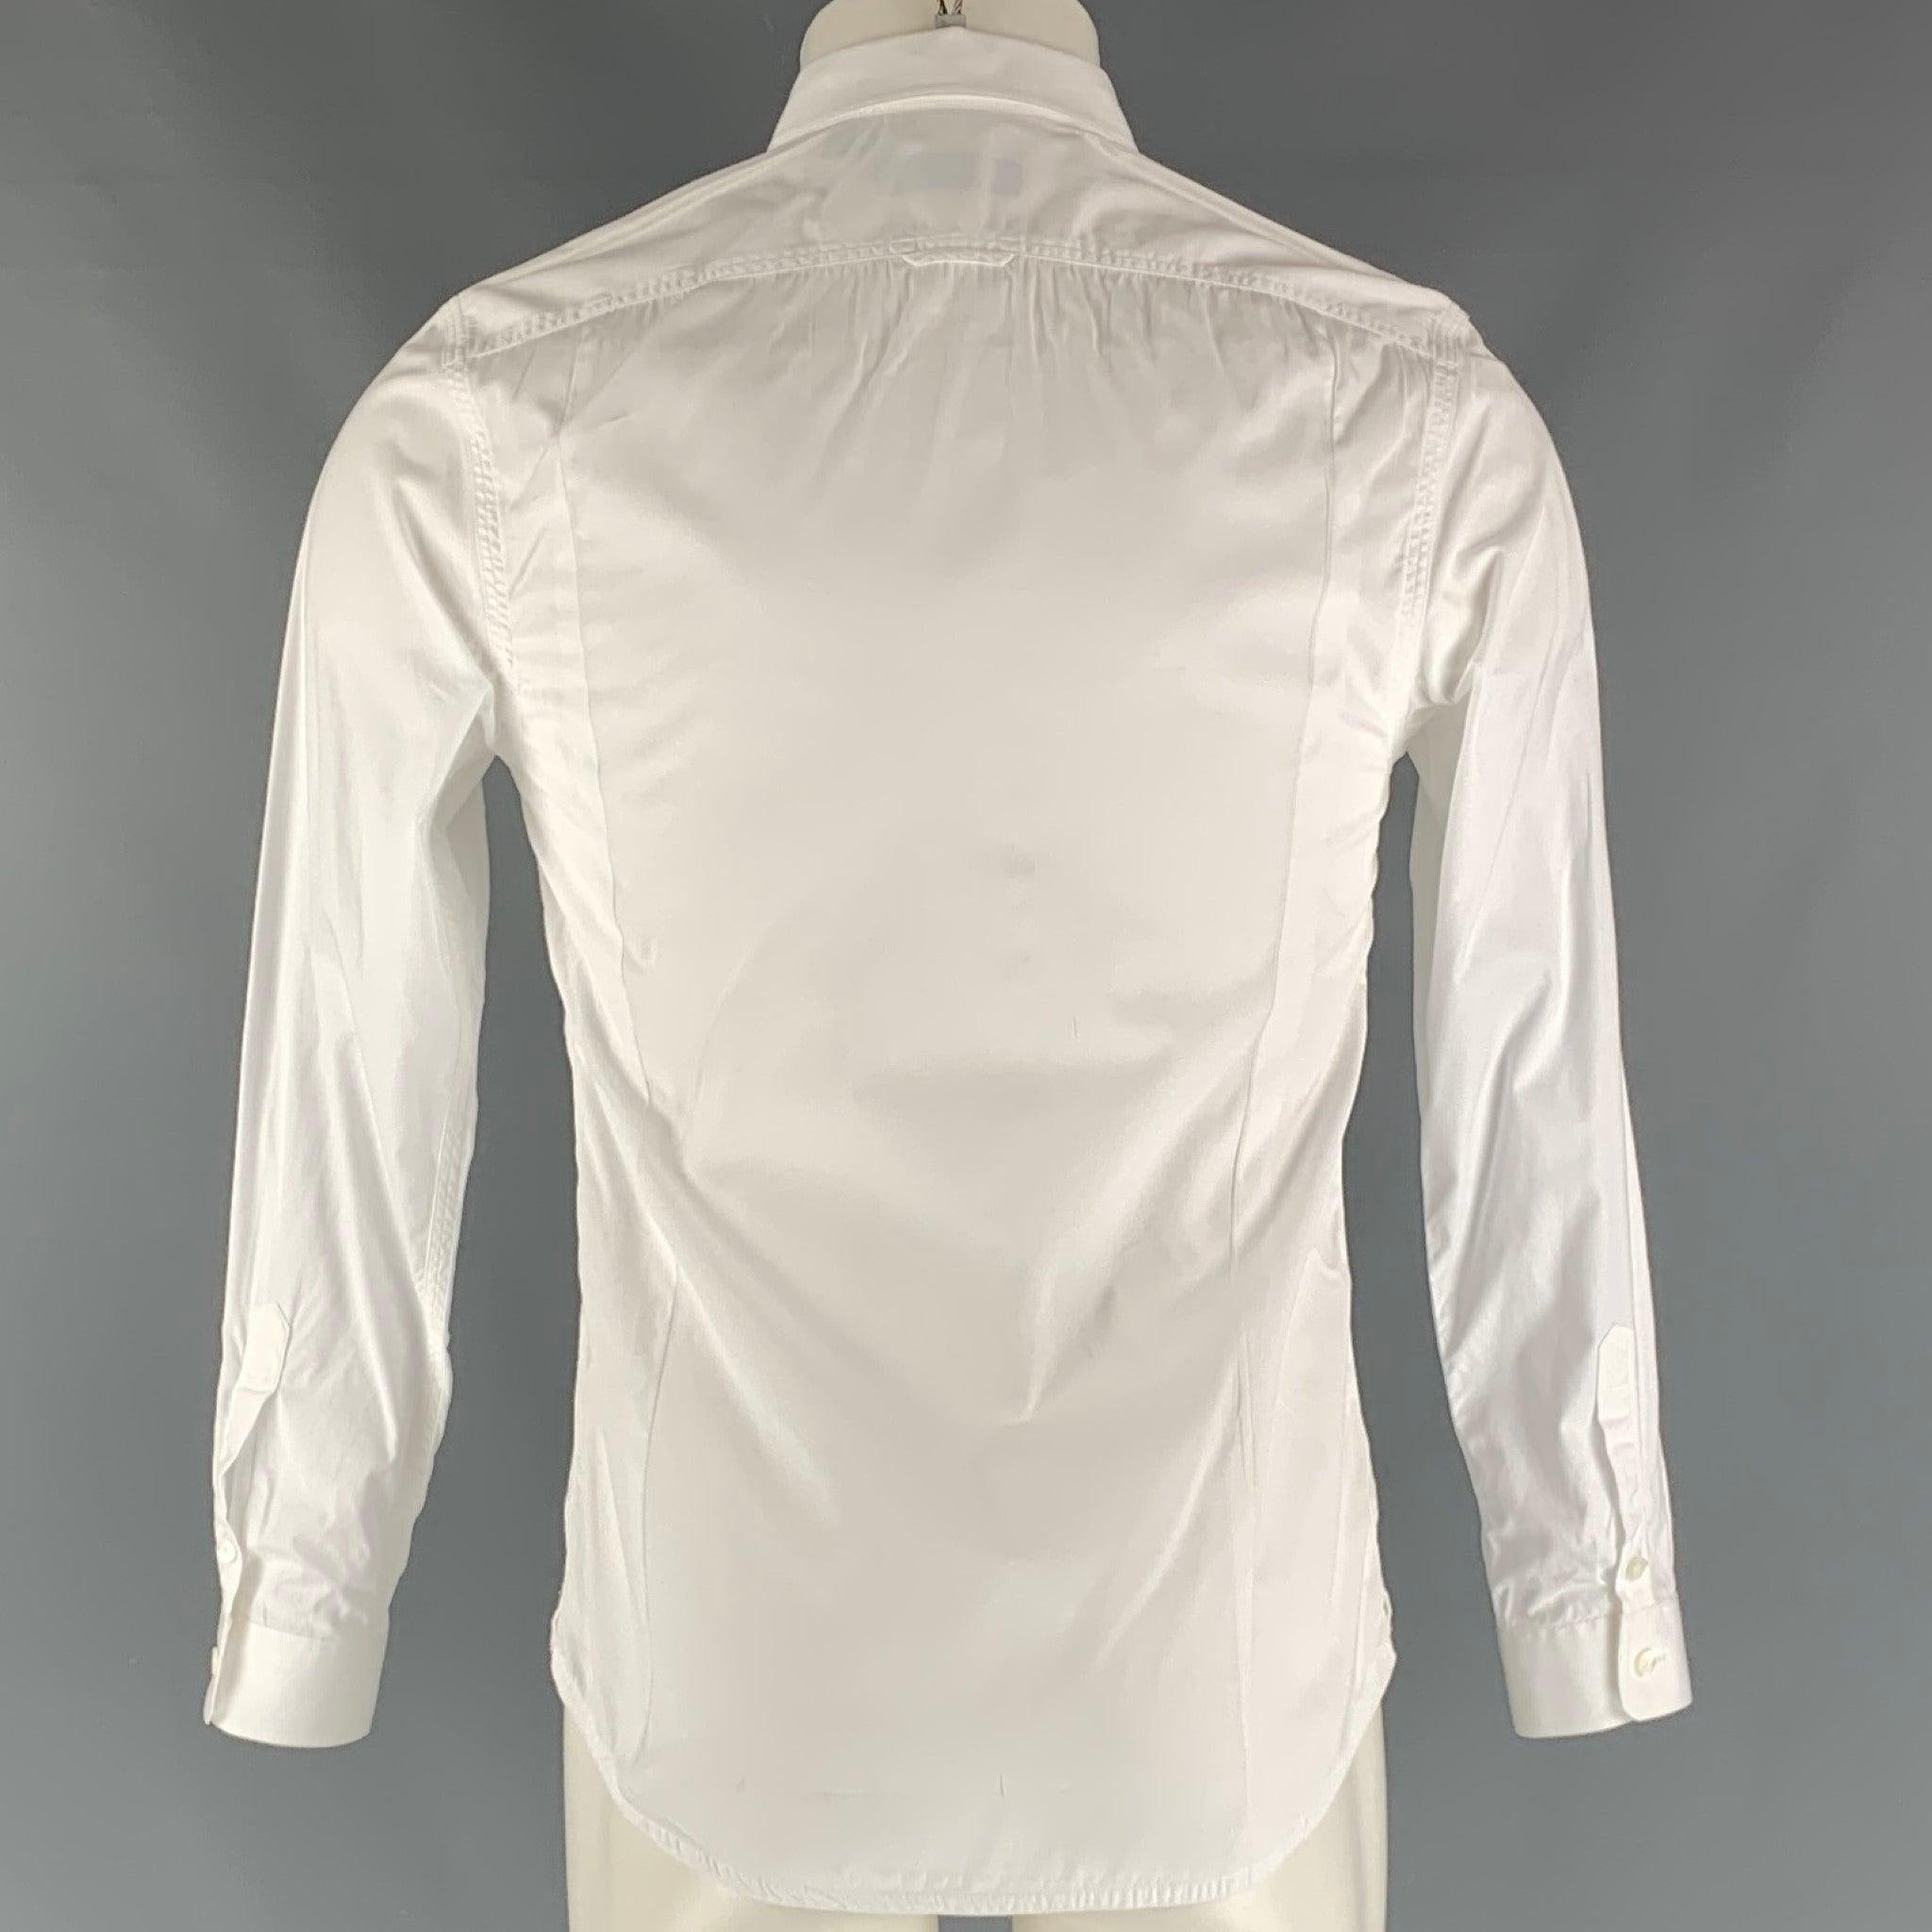 BURBERRY PRORSUM Size 38 White Solid Cotton One pocket Long Sleeve Shirt In Good Condition For Sale In San Francisco, CA